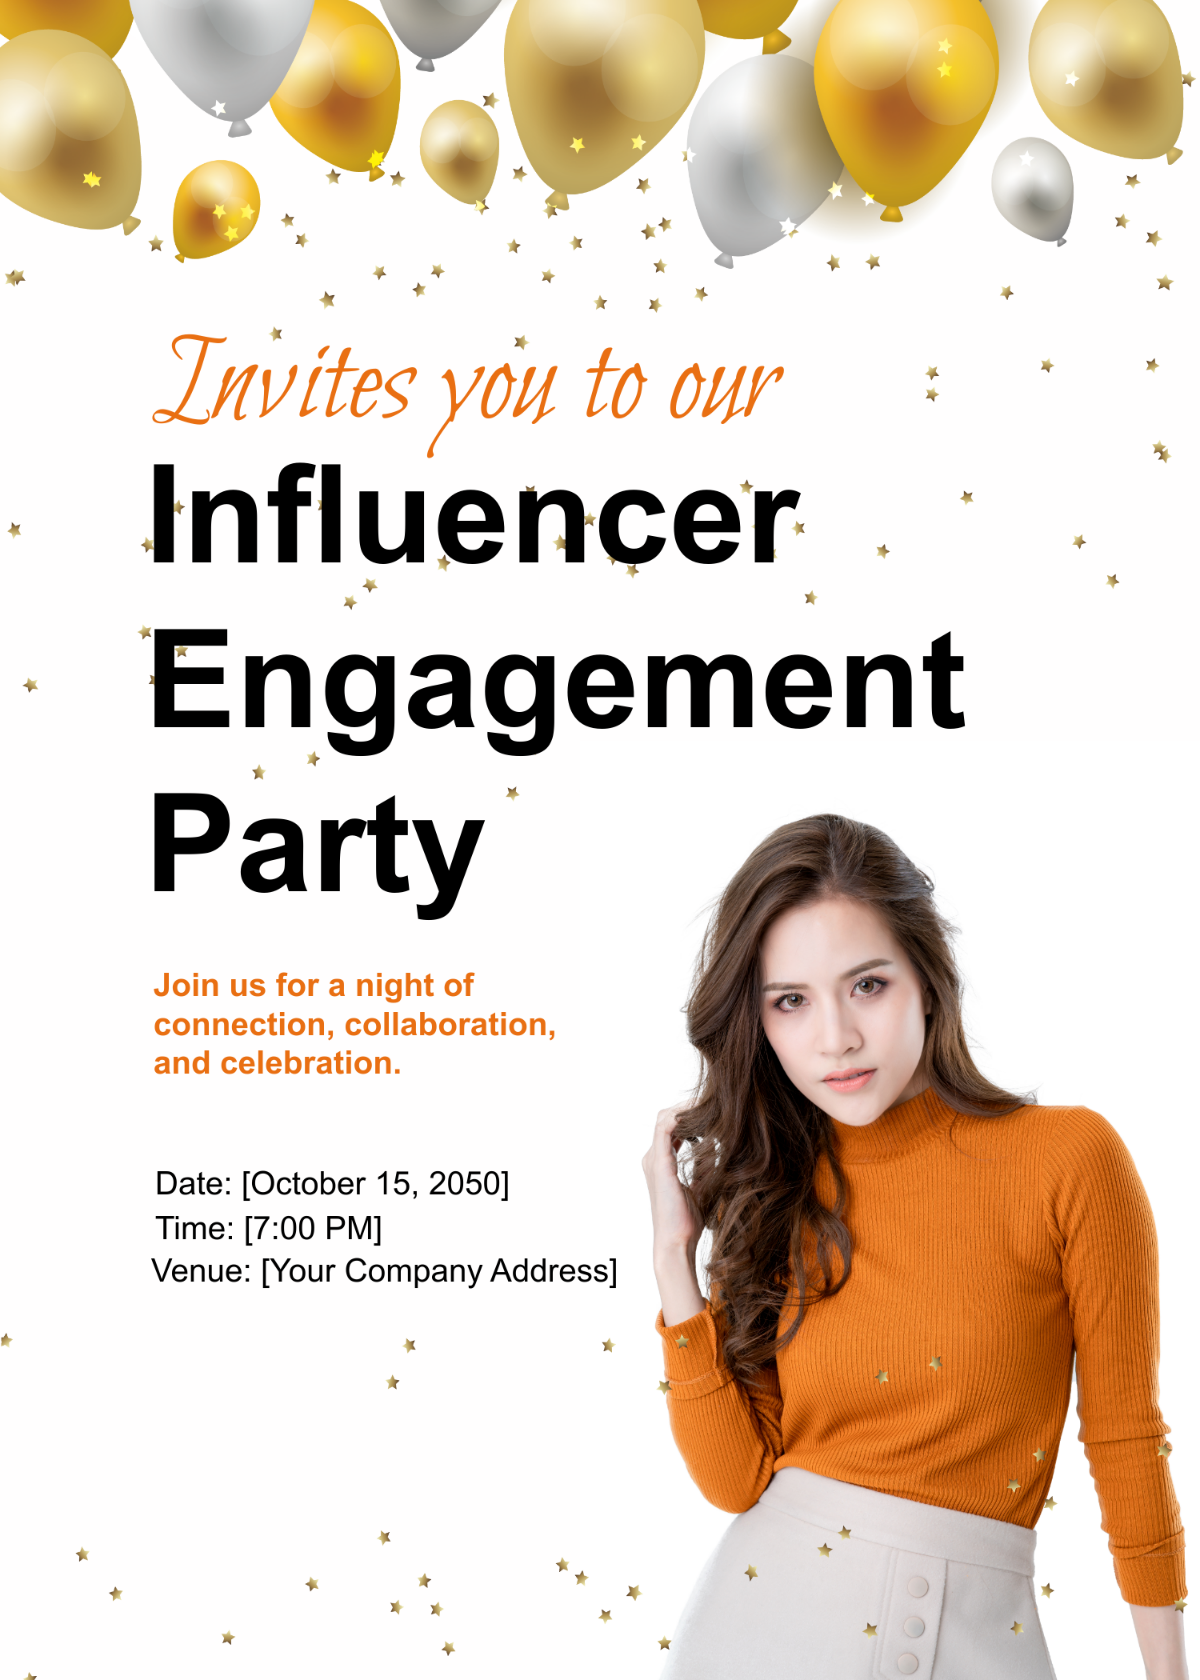 Influencer Engagement Party Invitation Card Template